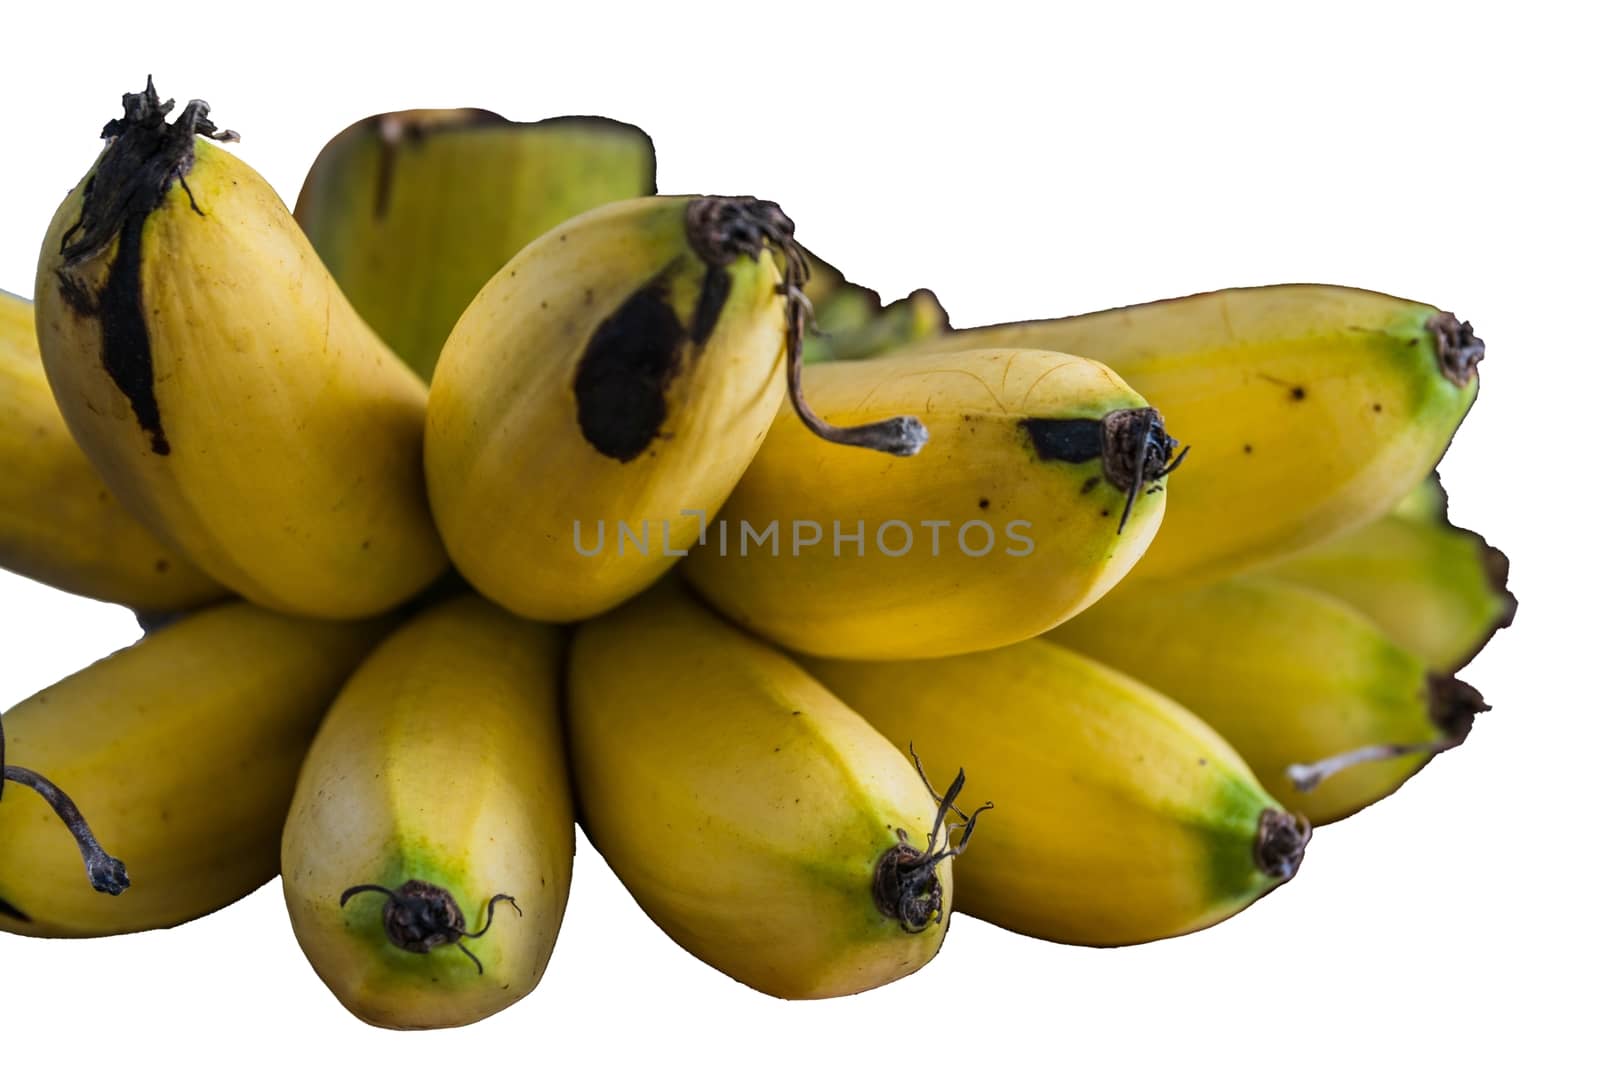 Bunch of bananas isolated on white background by peerapixs